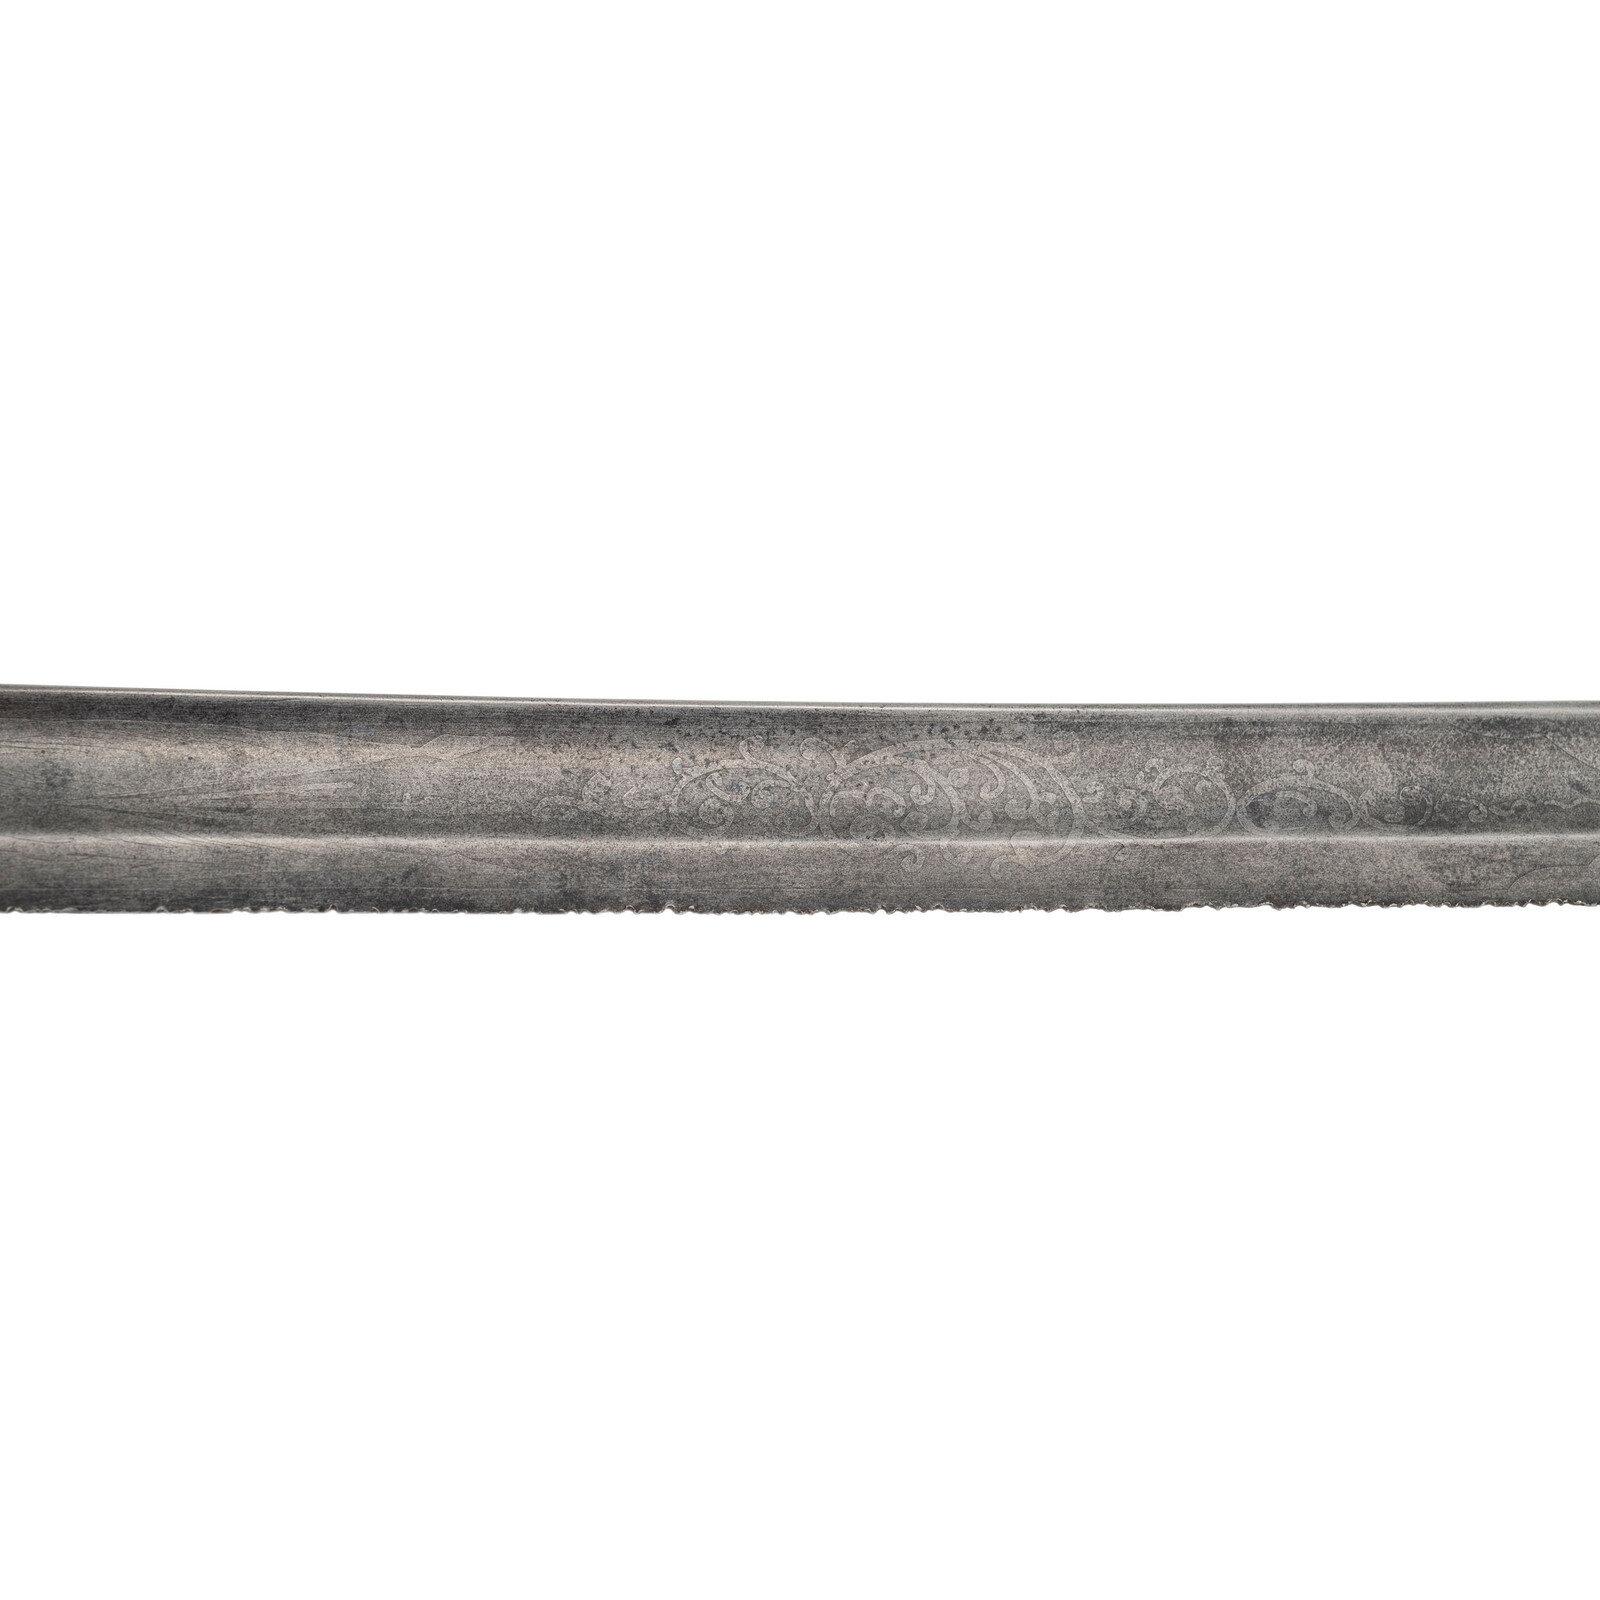 Imported Model 1850 Foot Officer's Sword of Lt. William Tompkins - 115th NY - KIA at Olustee